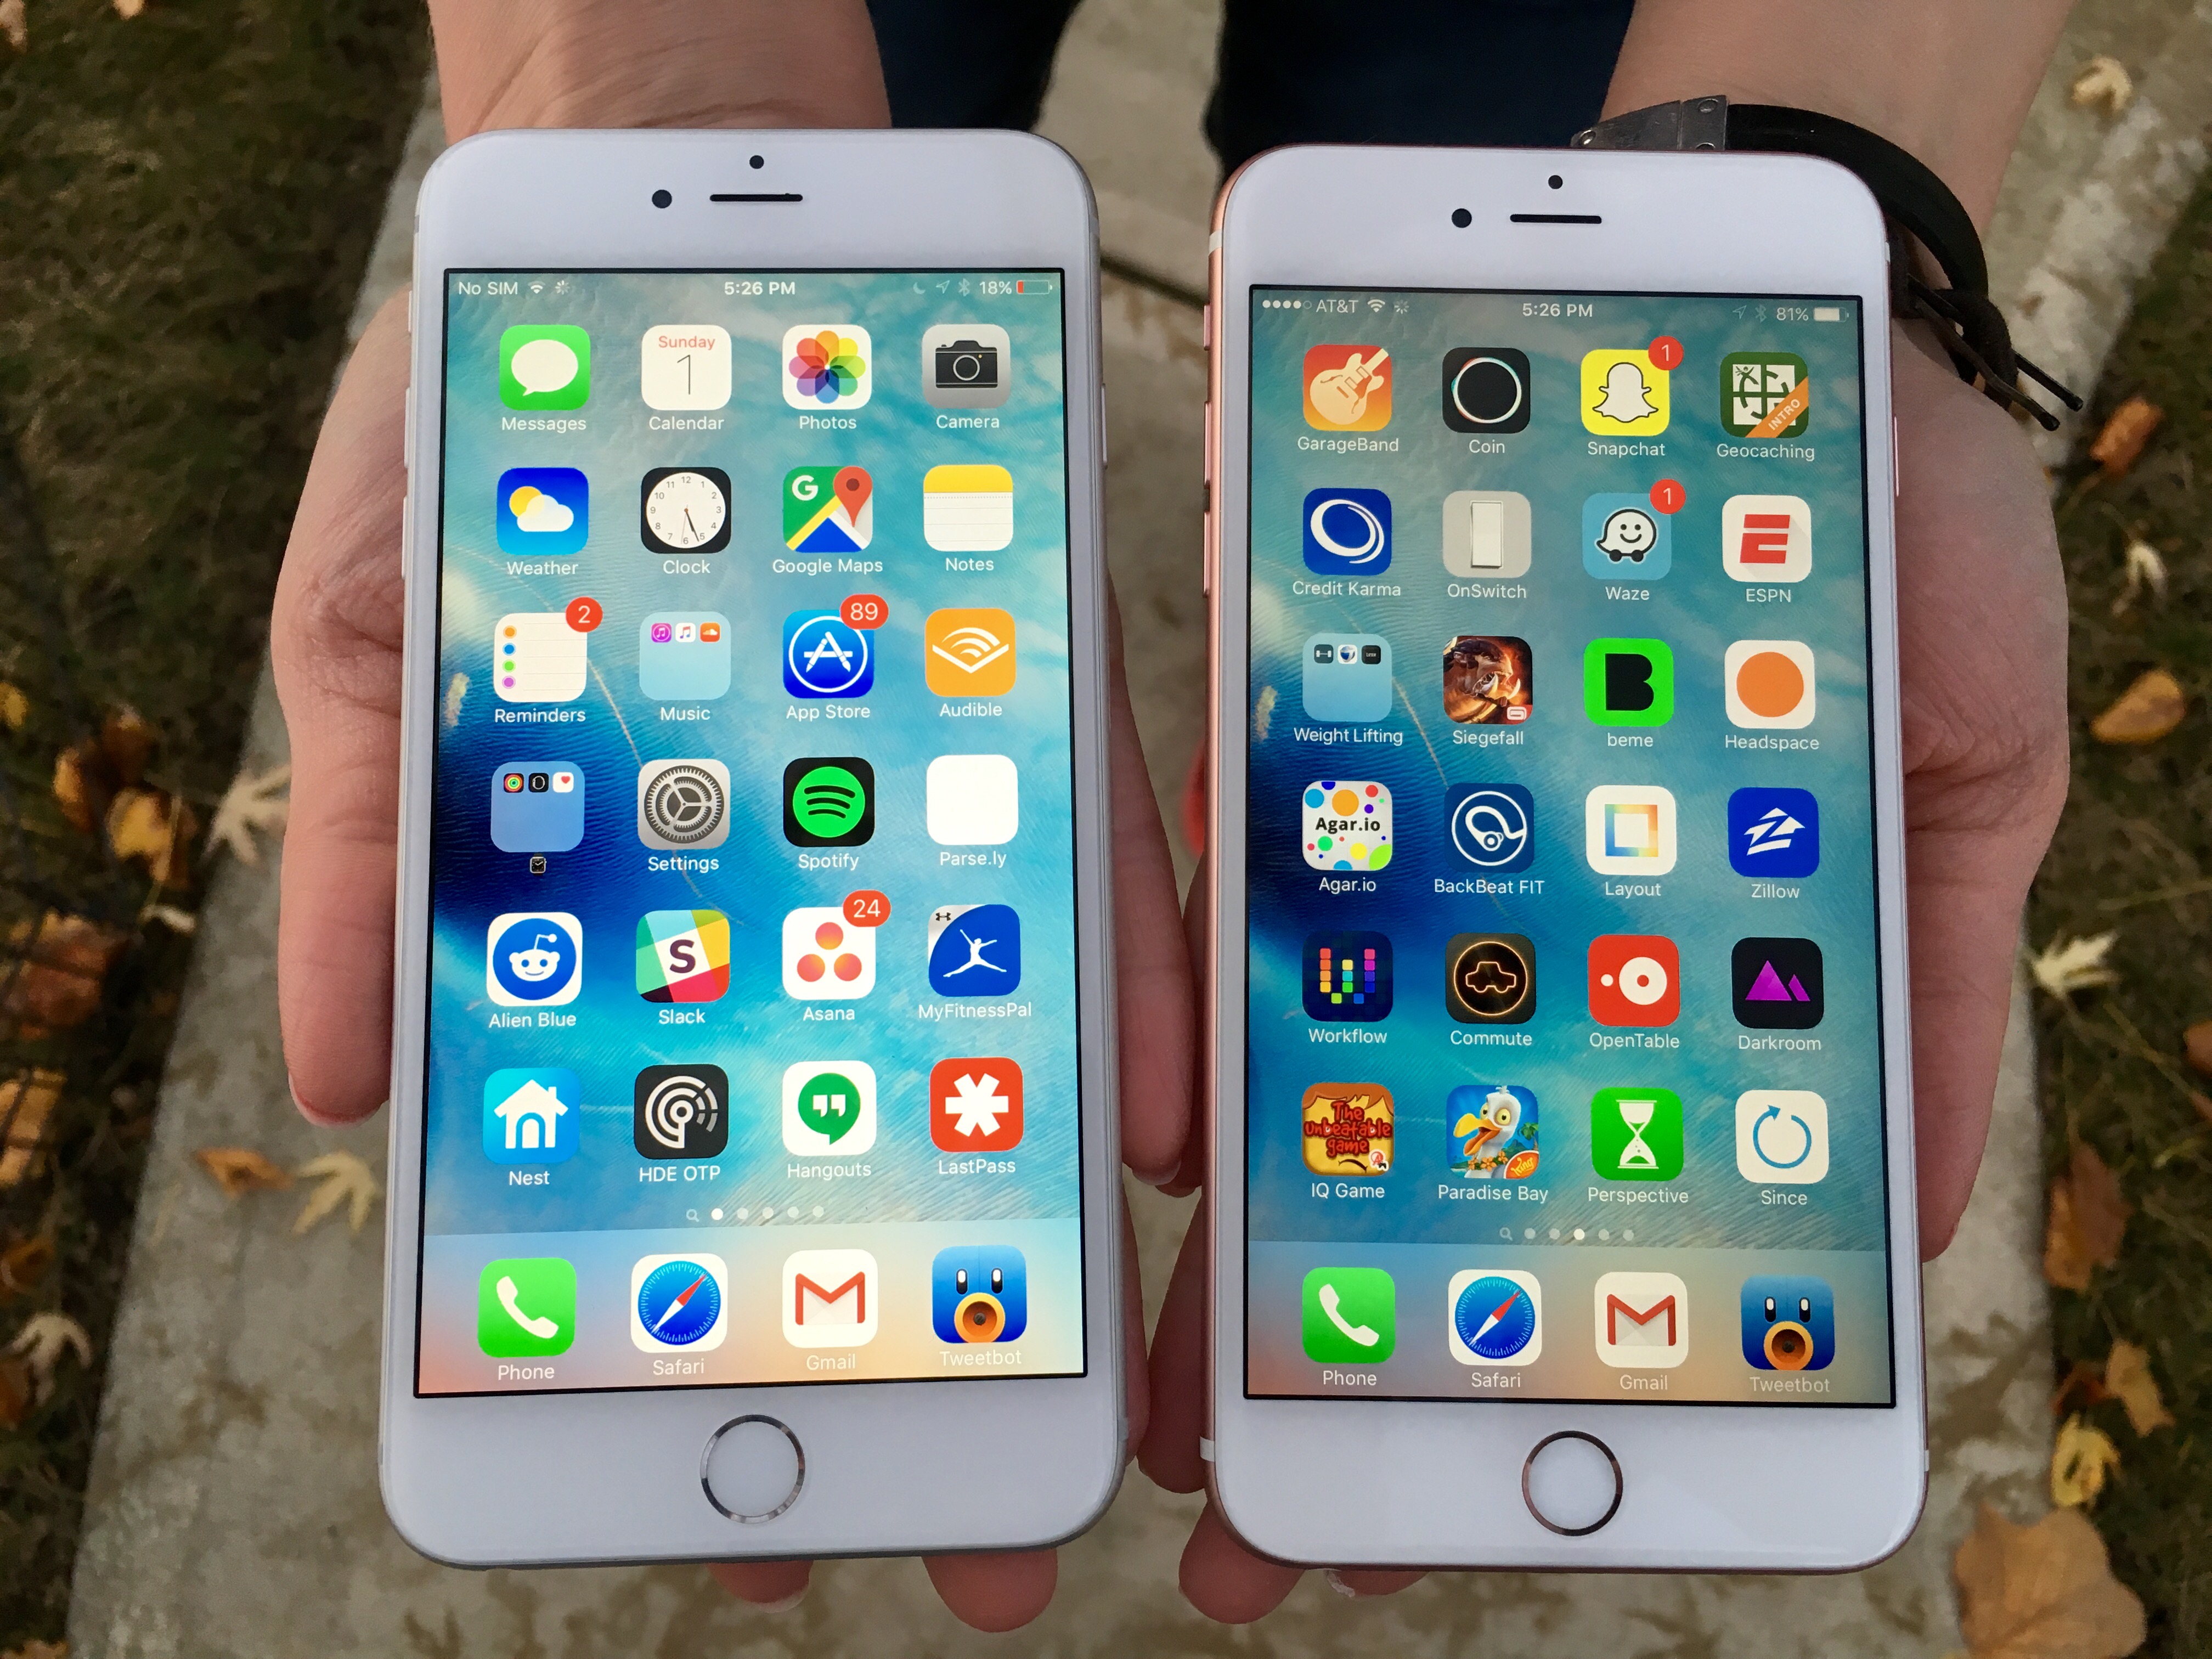 What you need to know about the iPhone 6s Plus and iPhone 6 Plus iOS 9.1 update.